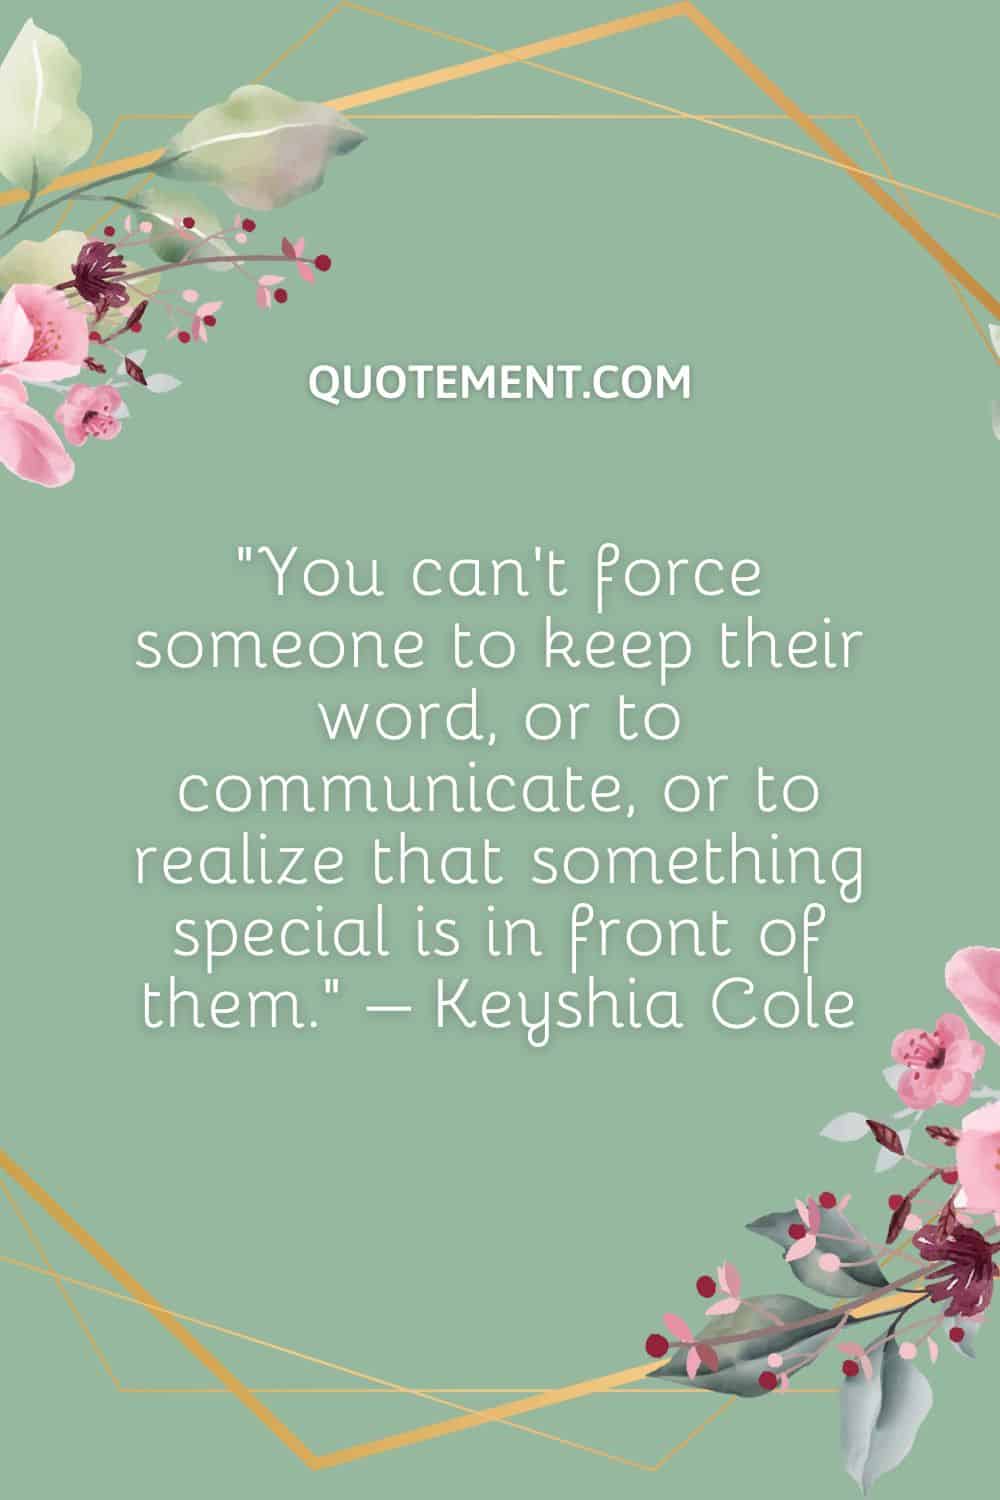 You can’t force someone to keep their word, or to communicate, or to realize that something special is in front of them